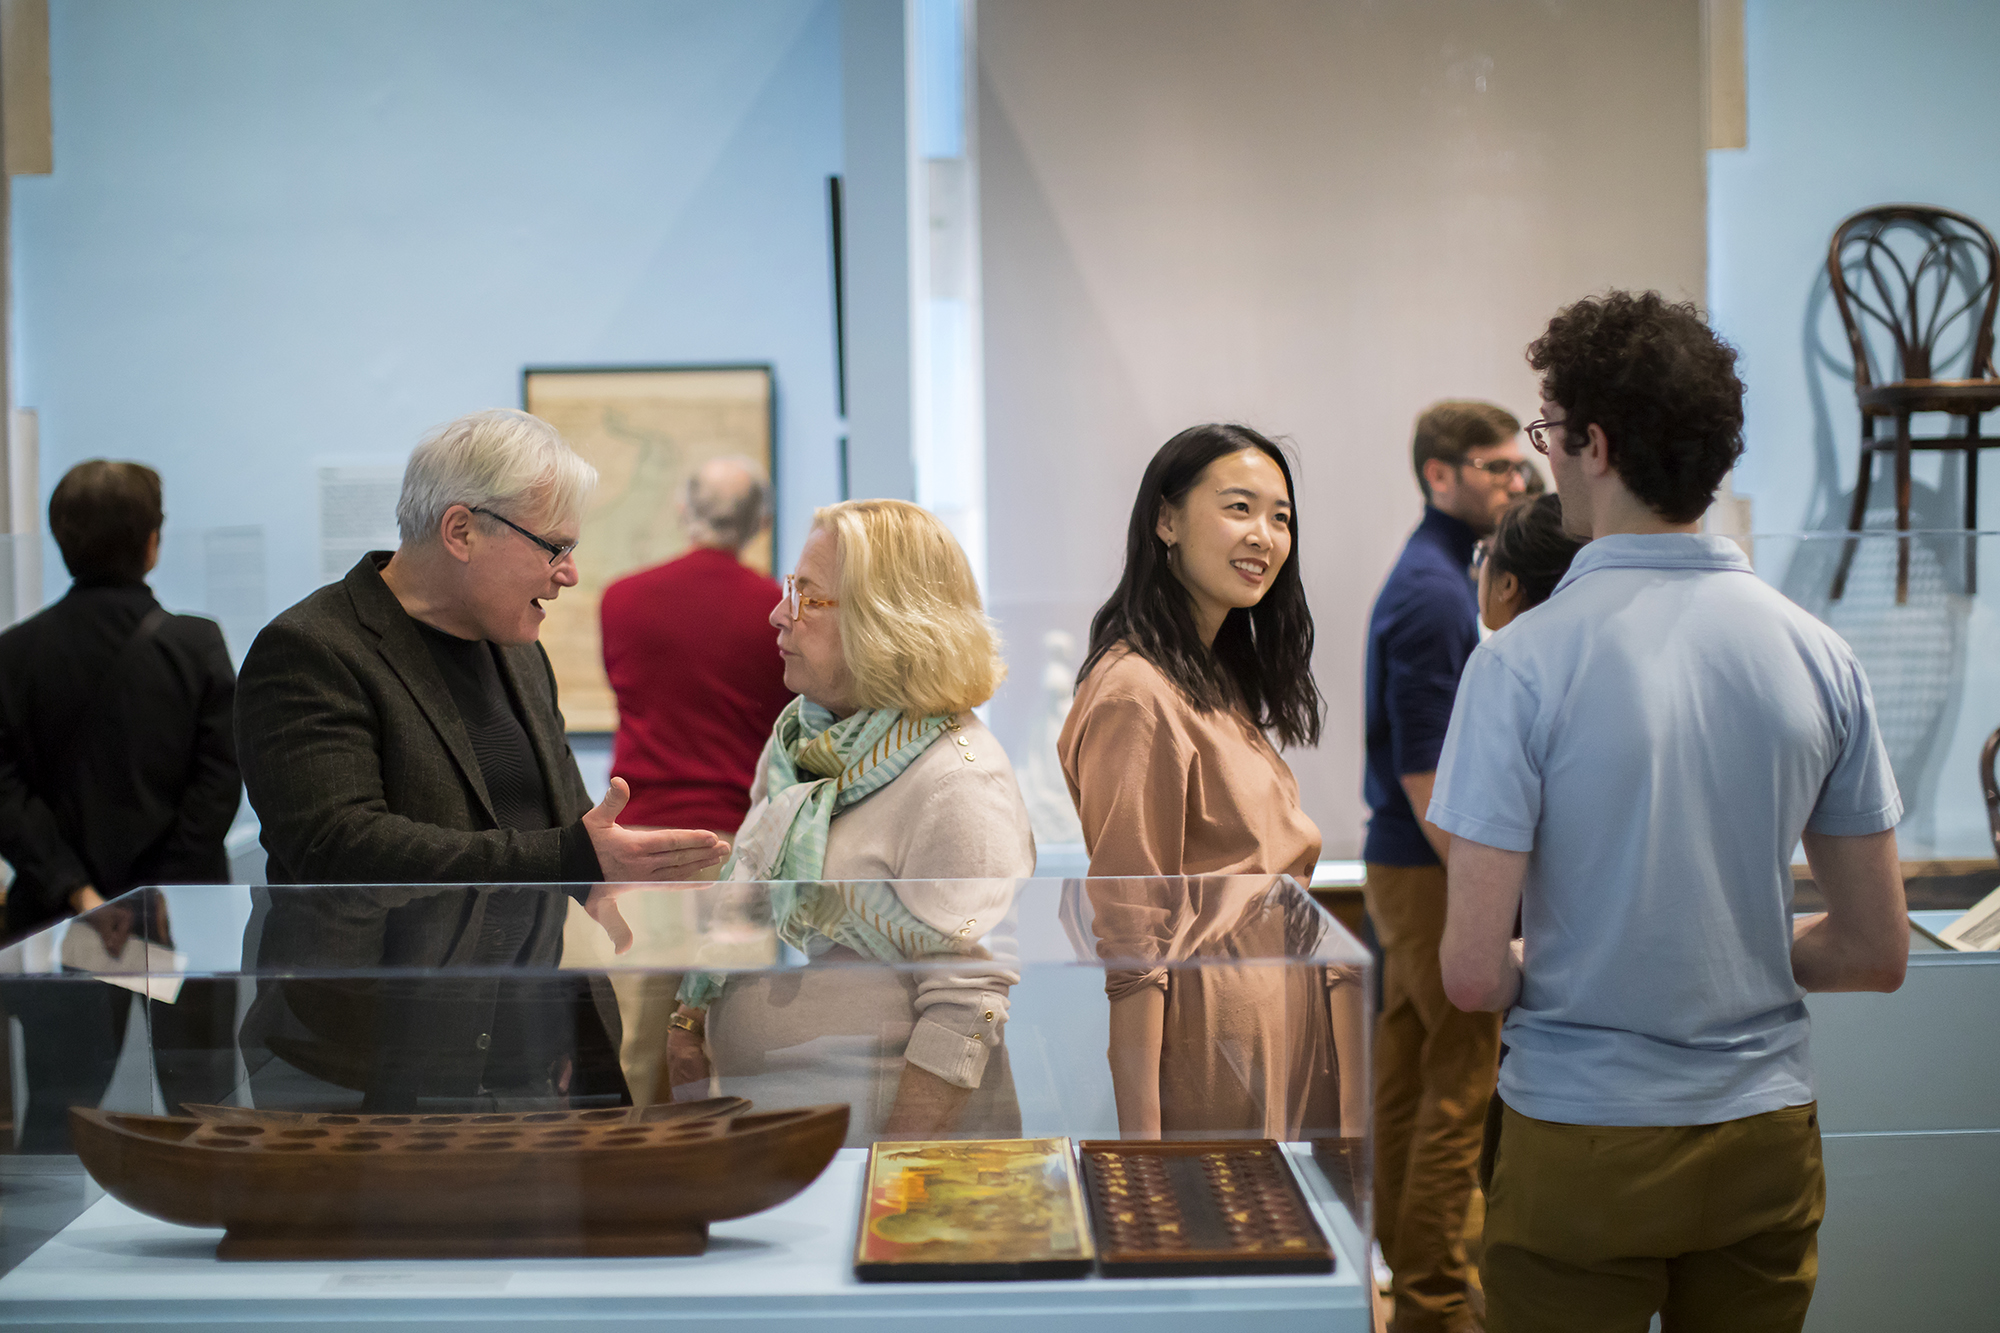 Penn Professor André Dombrowski teaches a curatorial seminar on World's Fairs, resulting in an Arthur Ross Gallery exhibition.